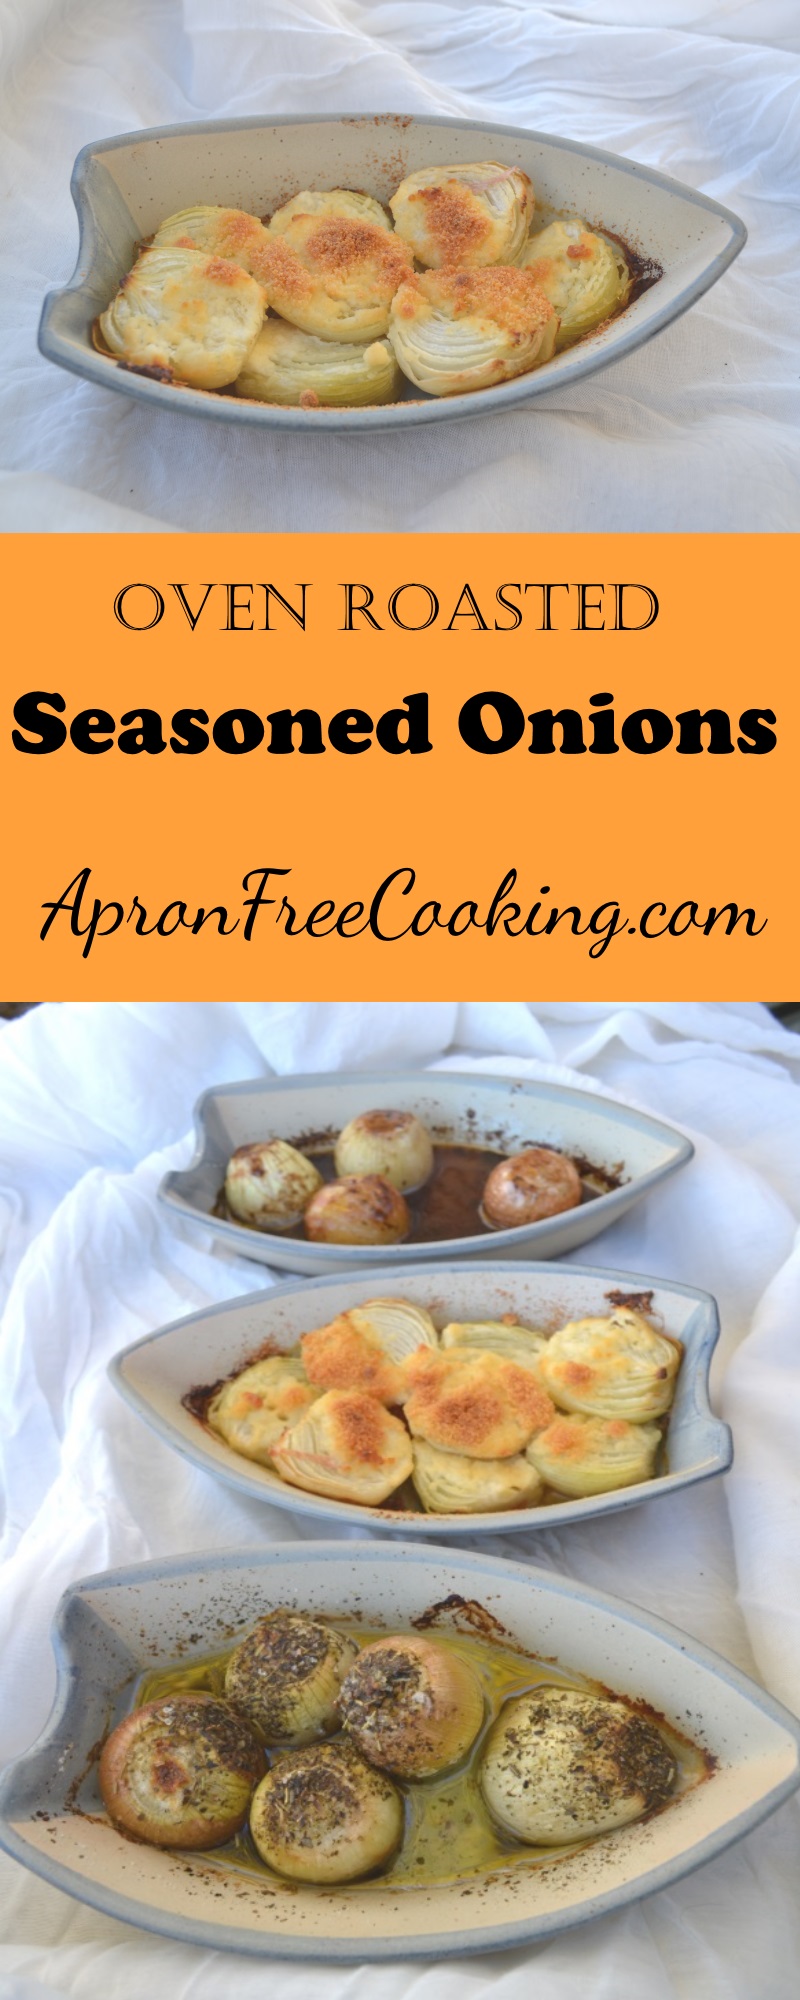 Oven Roasted Onions